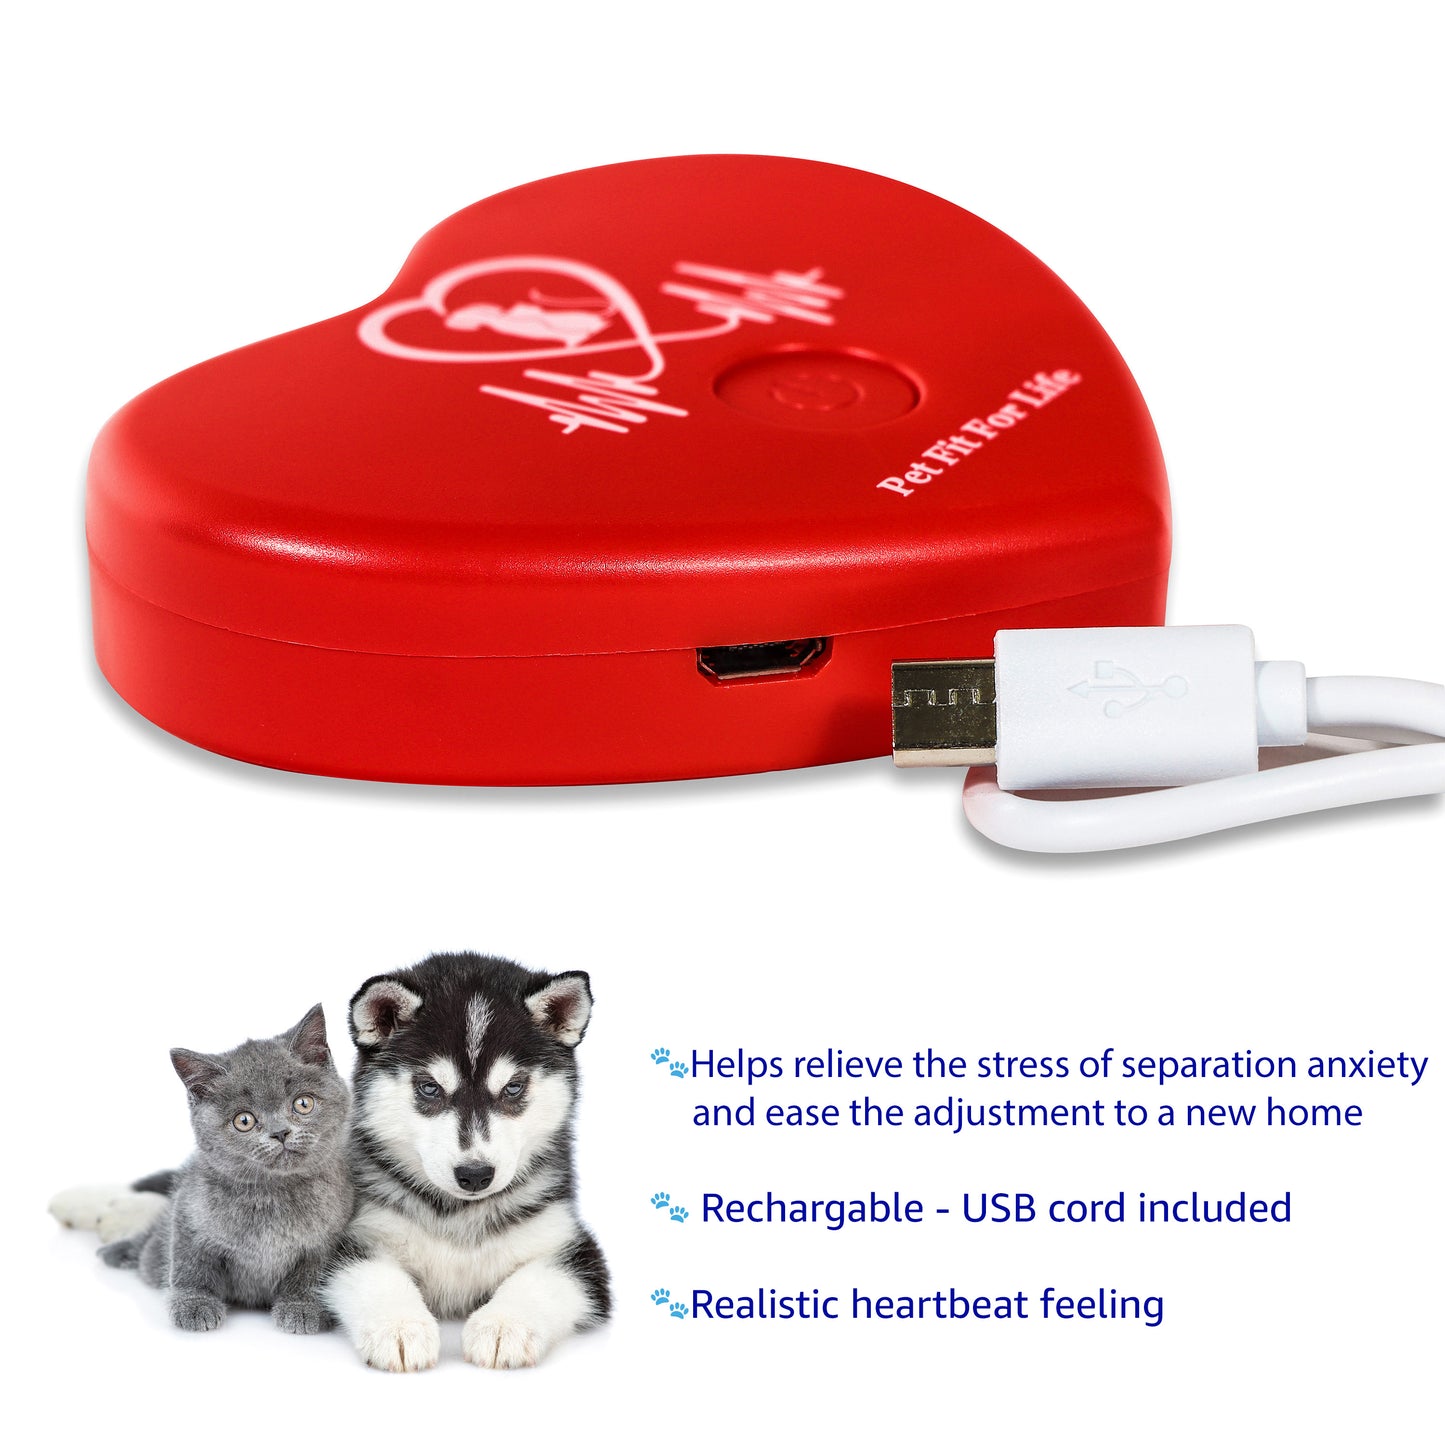 Simulated Heartbeat for Calming Anxious Dogs or Cats